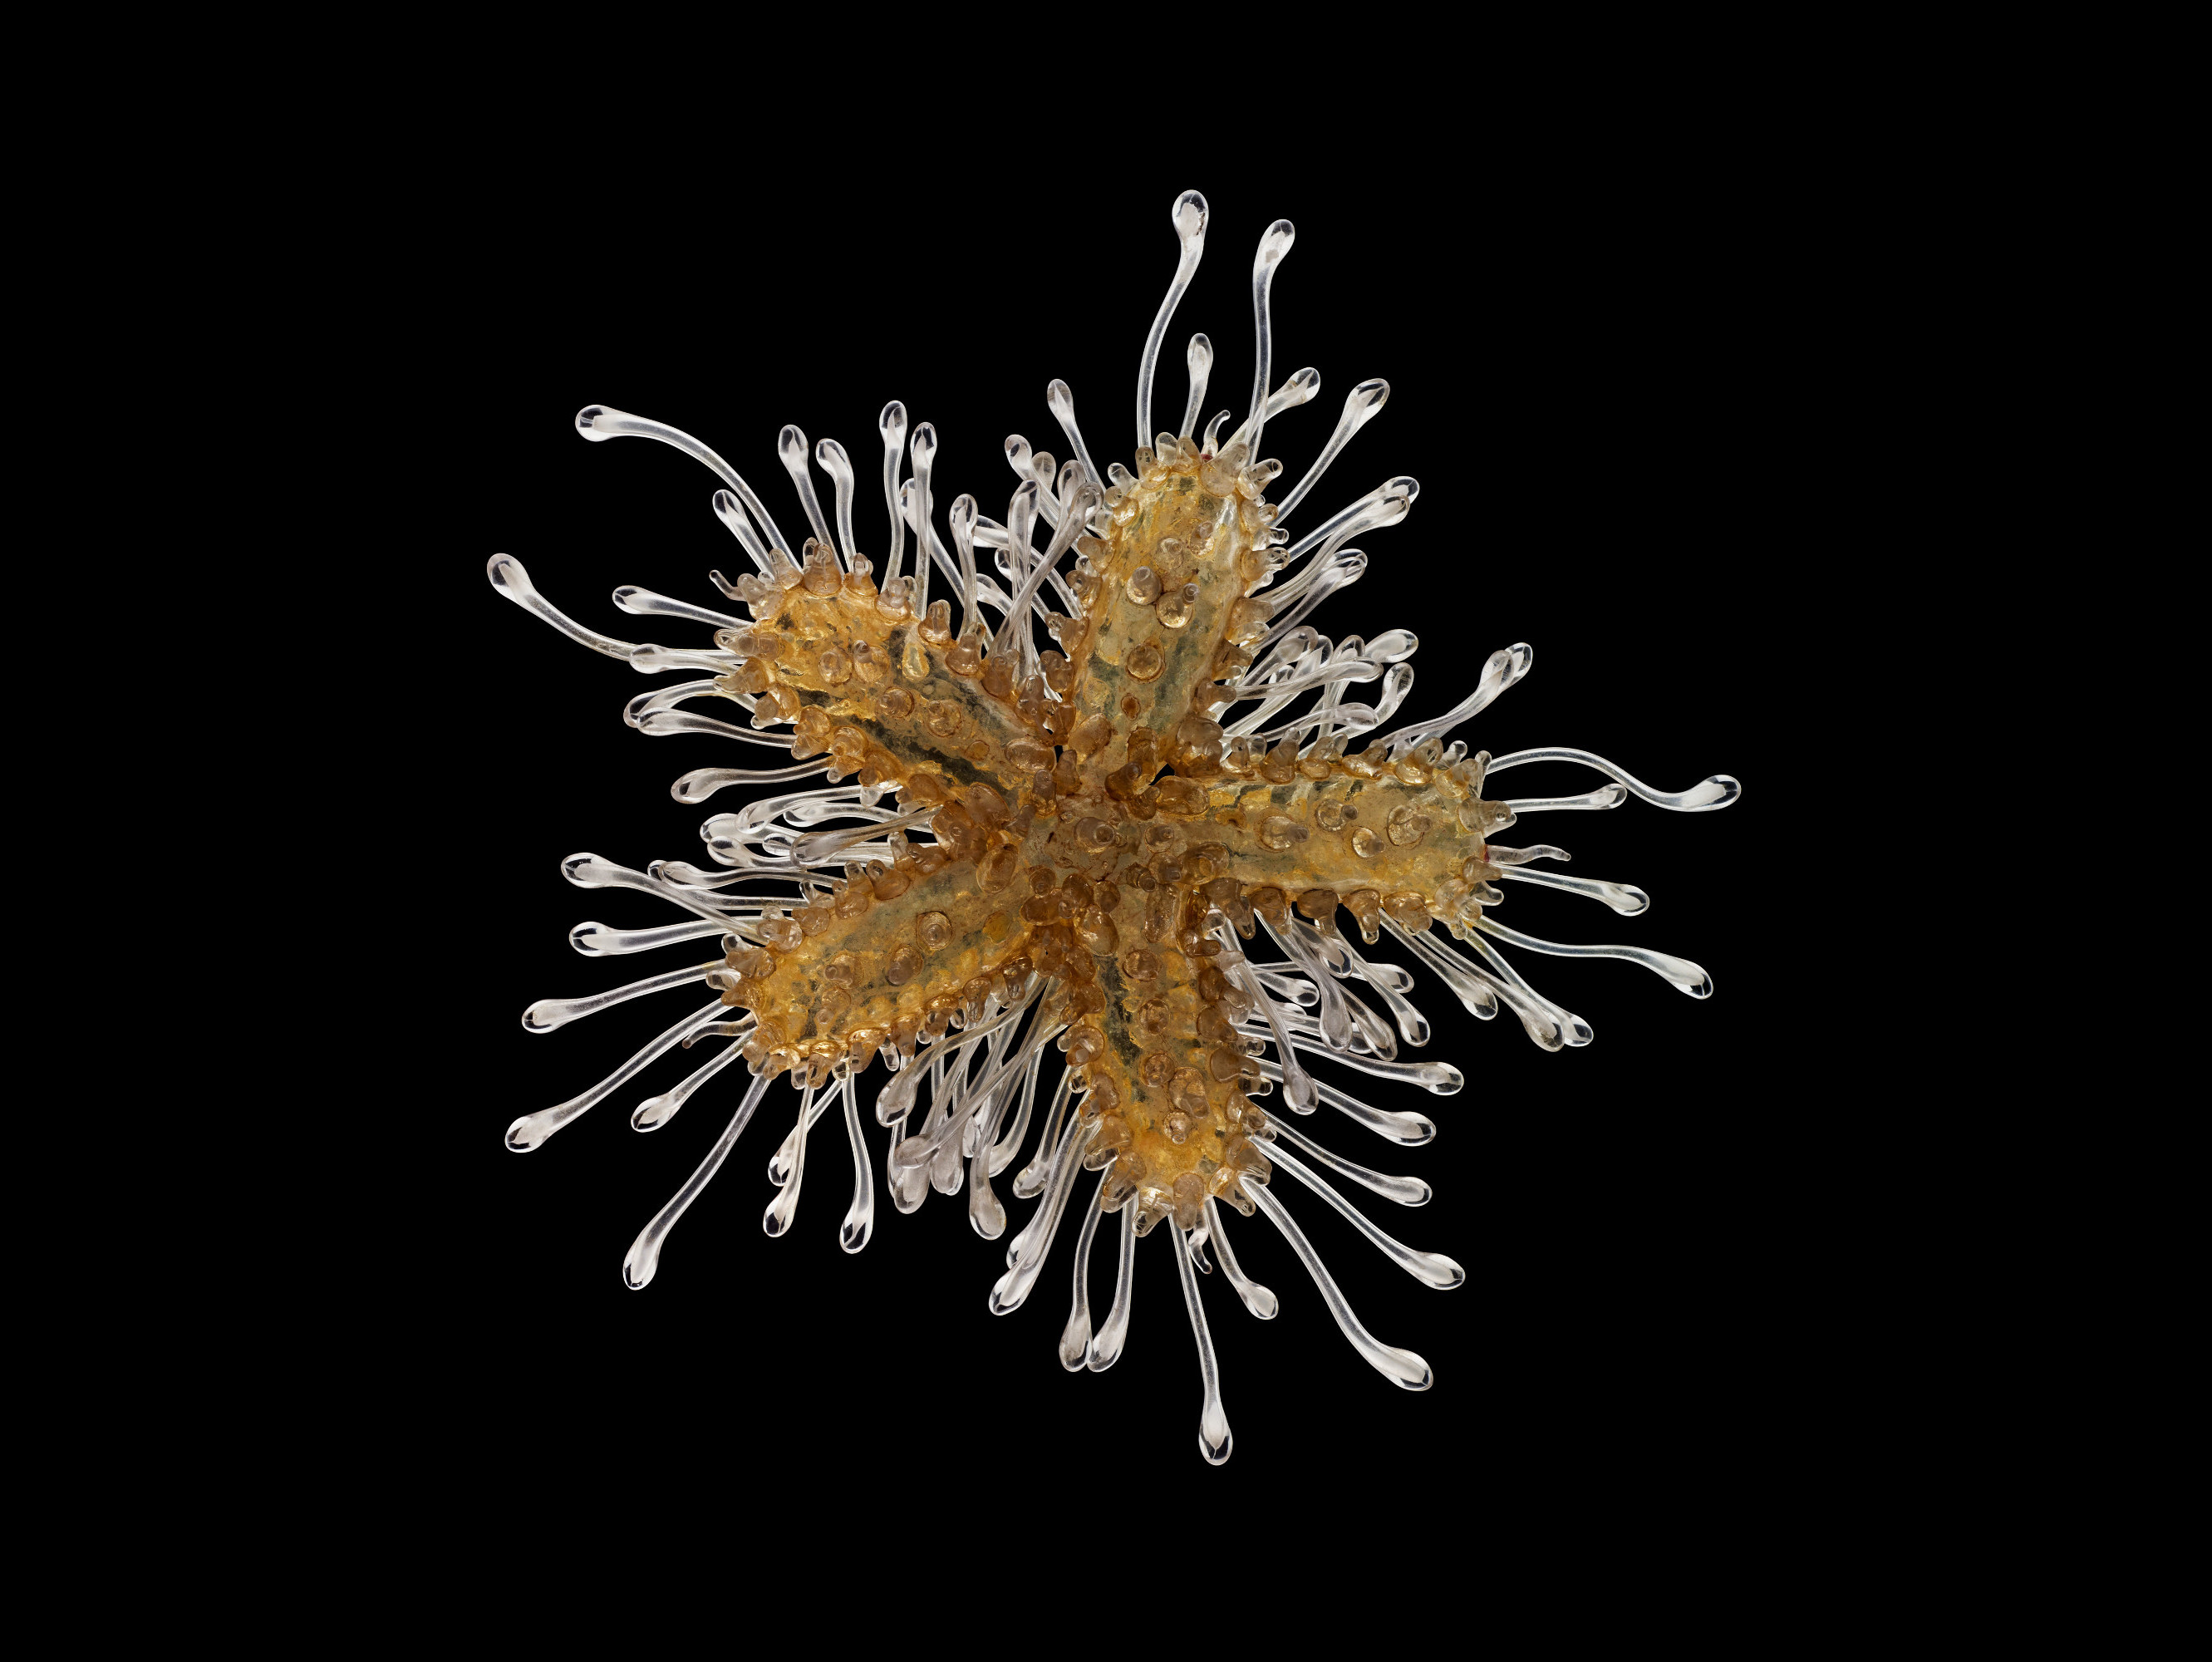 The common sea star (Asterias rubens) as a juvenile in glass. This is part of a sequence that the Blaschkas crafted showing the development of a sea star from planktonic larva to a newly settled juvenile. Photo by Guido Mocafico, courtesy of the Natural History Museum of Ireland. Image file courtesy of A Sea of Glass, by Drew Harvell